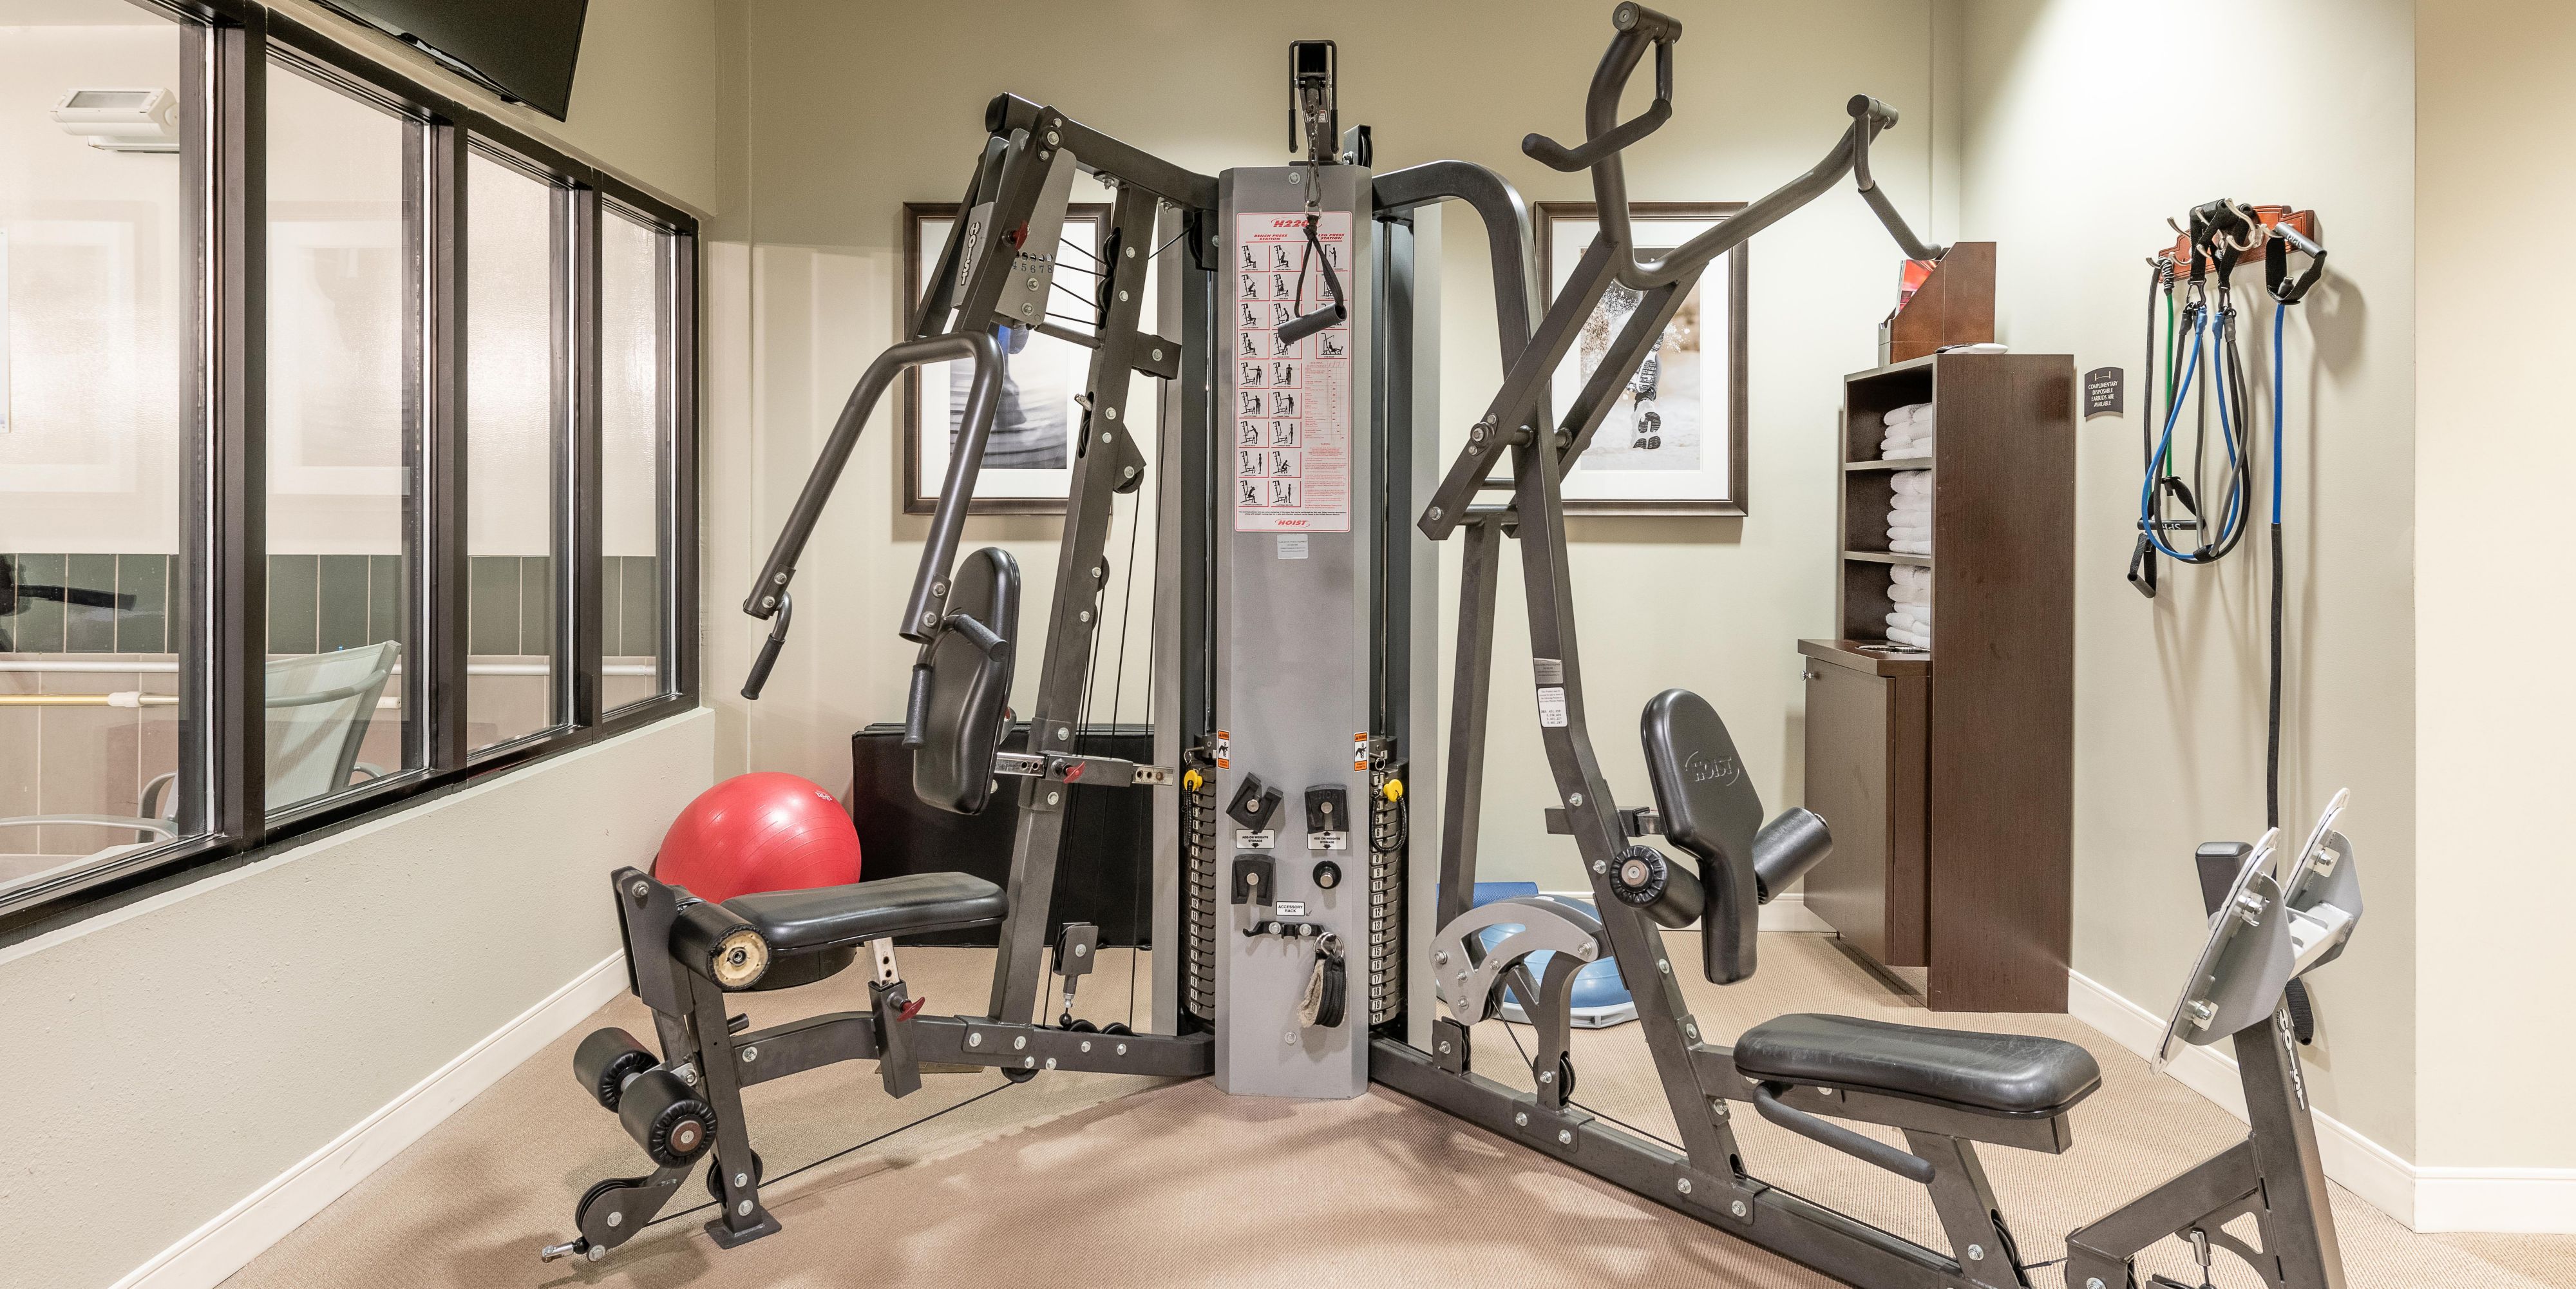 Stay fit while staying with us with our onsite fitness center